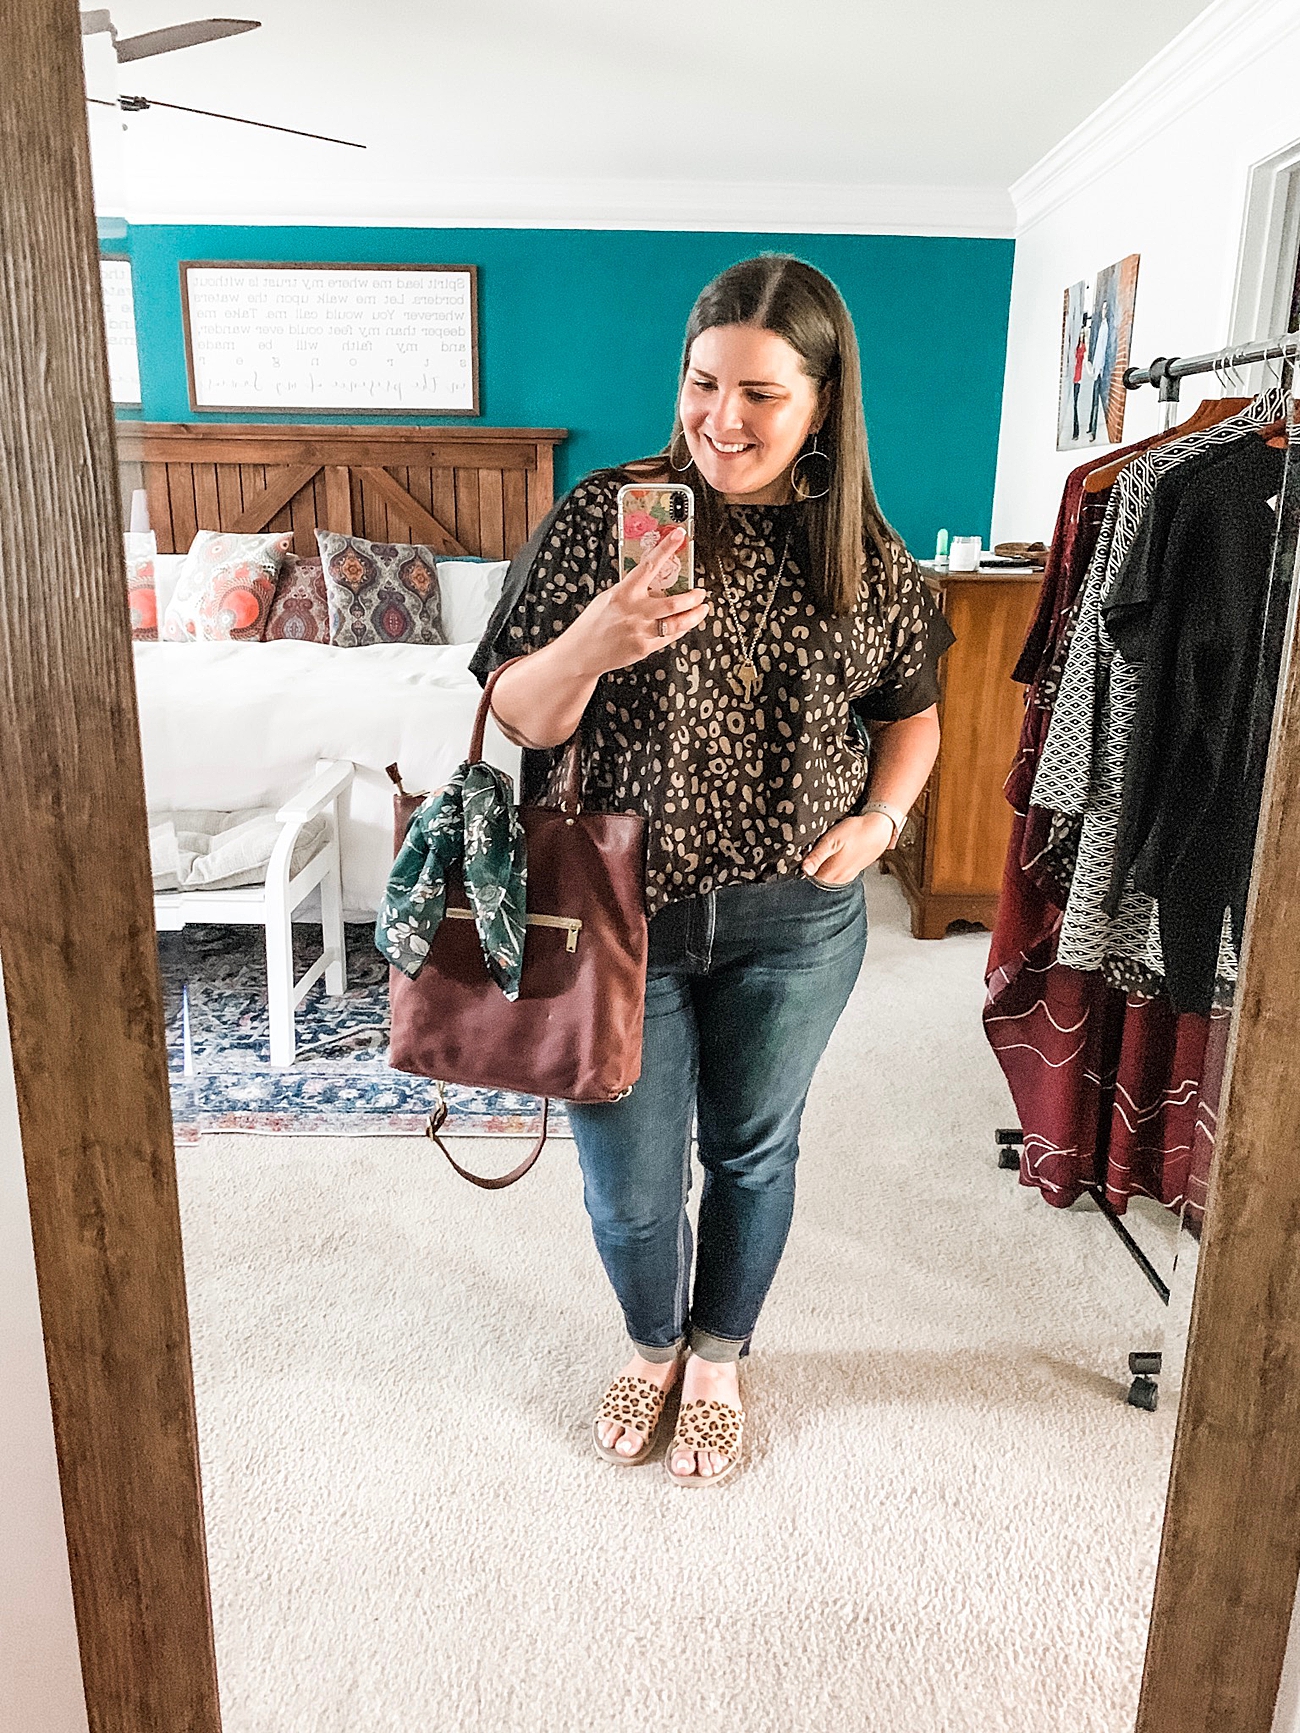 Sseko Designs Fall 2019 Sojourner Collection | Review + Try-On | Fair Trade Fashion #fairtradestyle #ethicalfashion http://www.ssekodesigns.com/mollystillman (2)